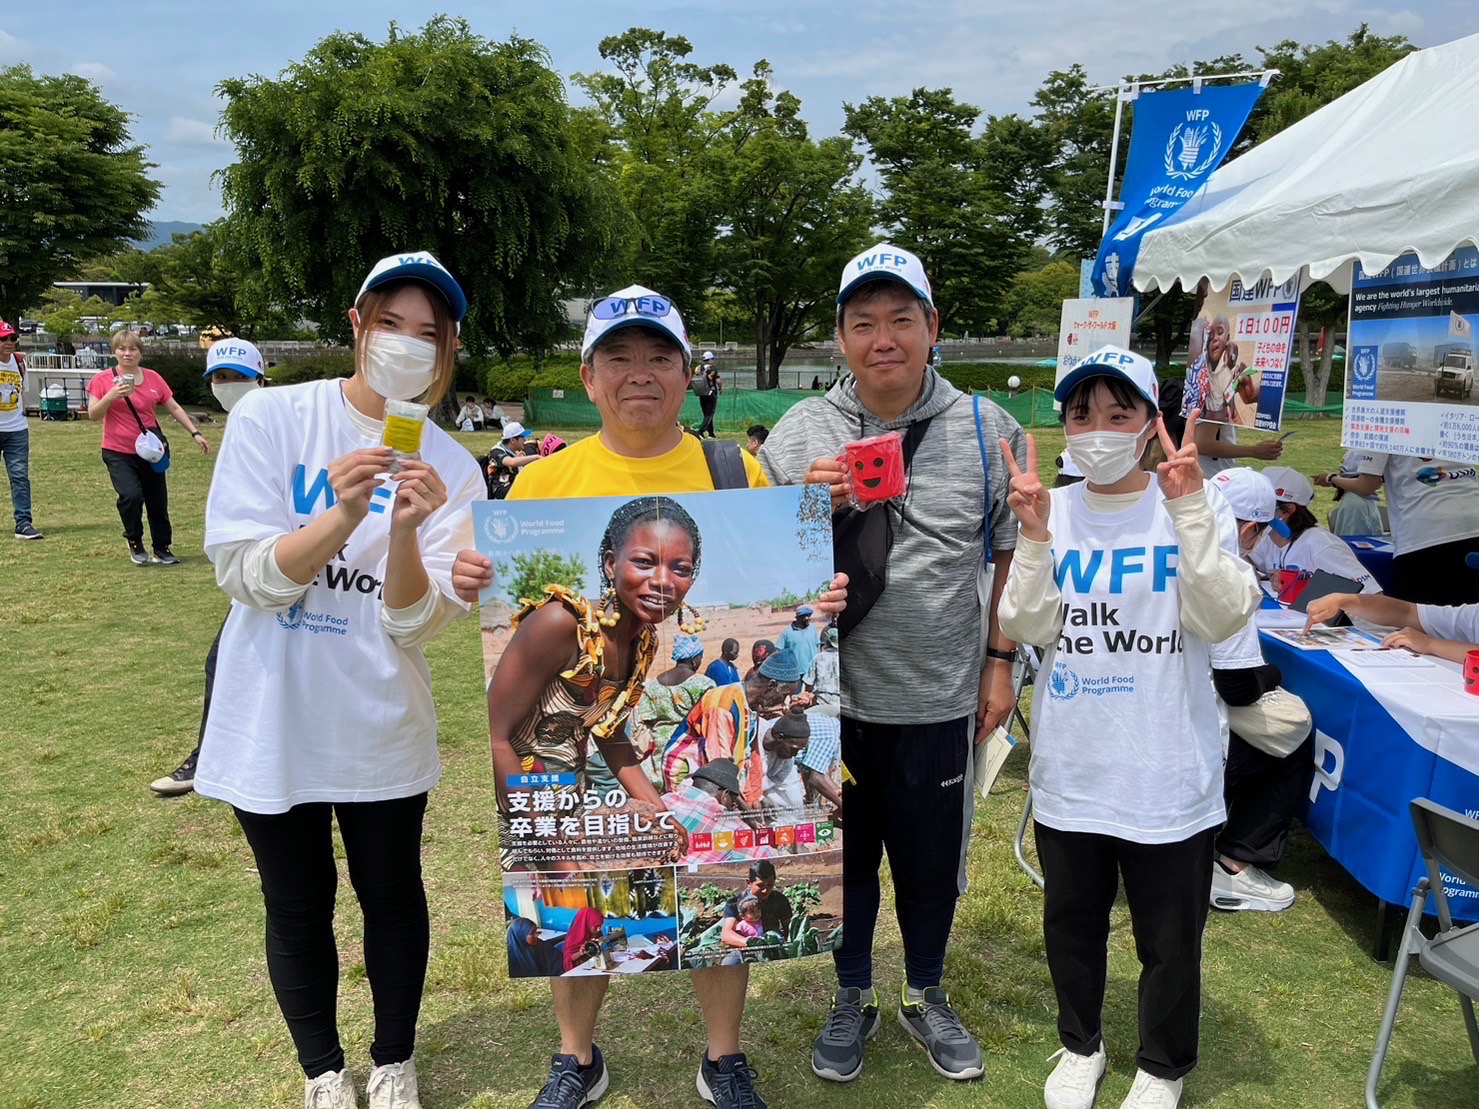 JFE General Managers Join in WFP Walk the World Osaka!